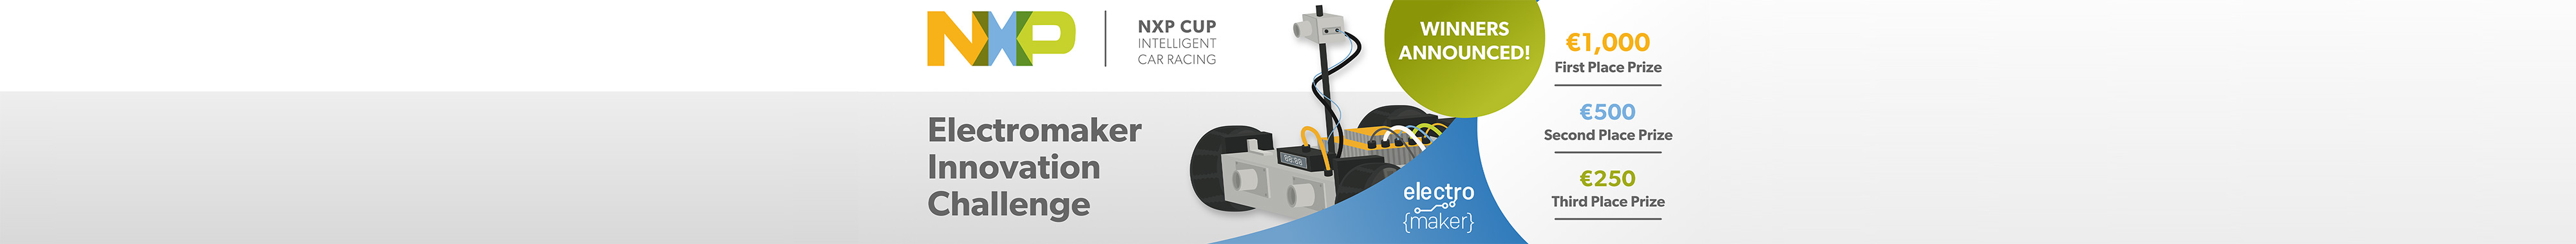 NXP Cup Electromaker Innovation Challenge